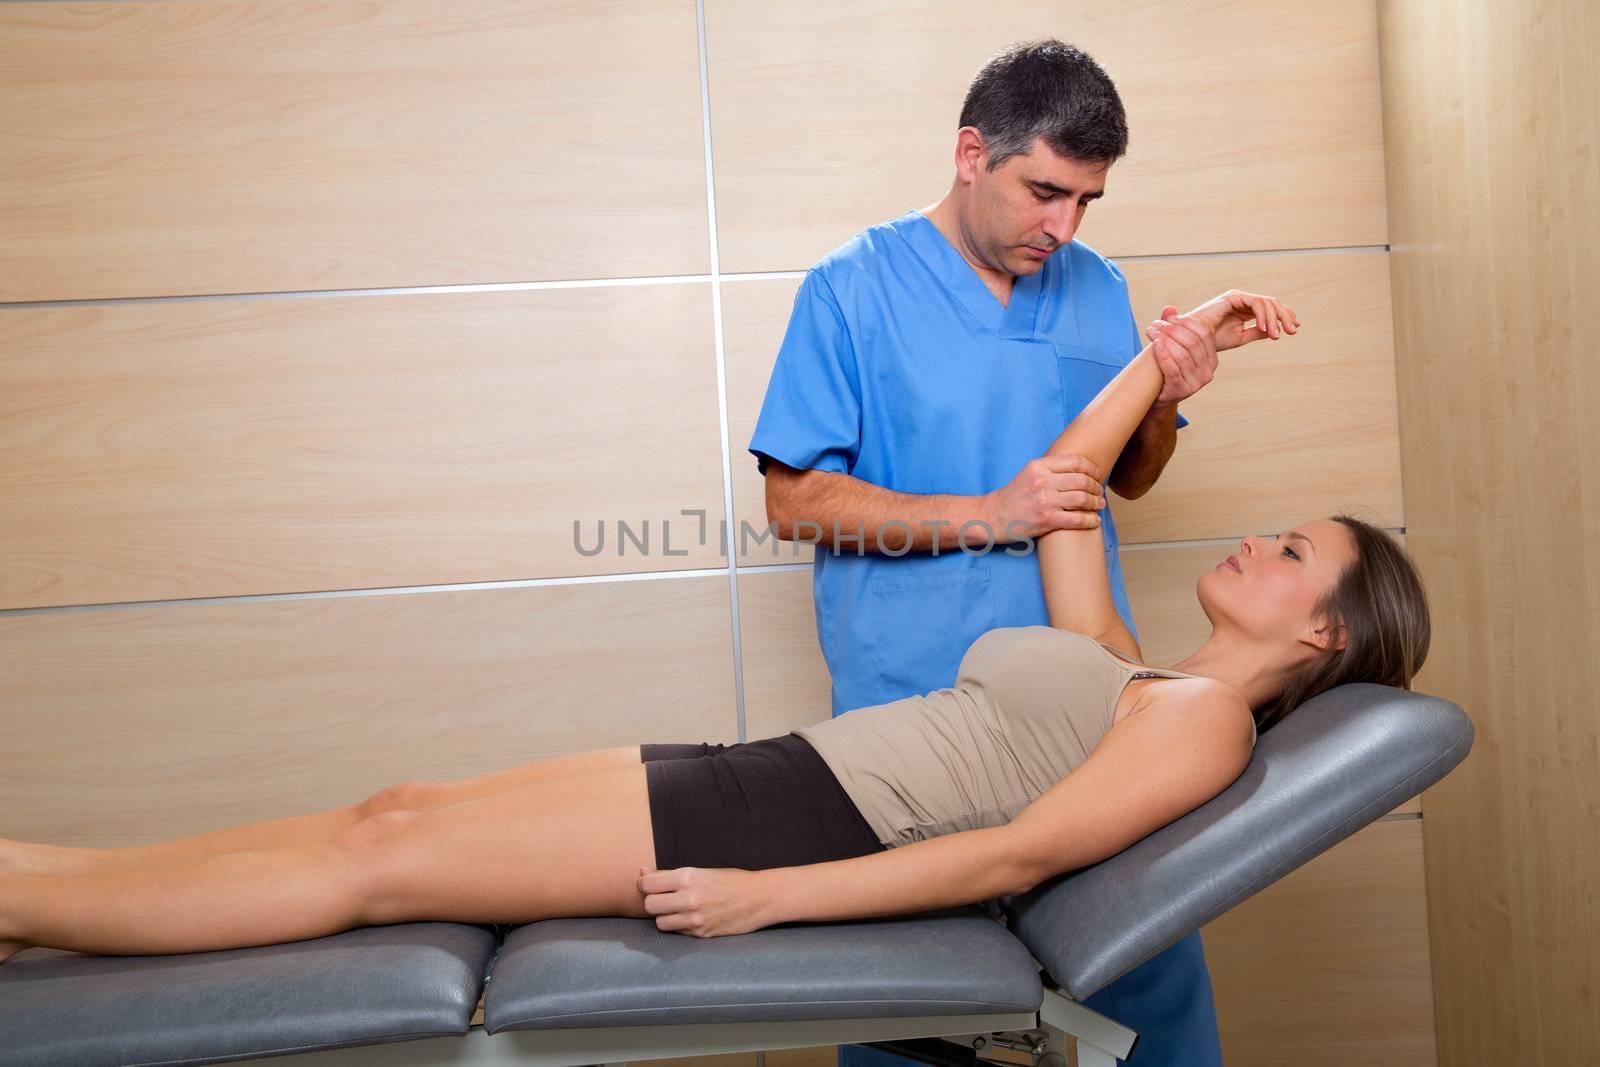 Shoulder physiotherapy doctor therapist and woman patient by lunamarina